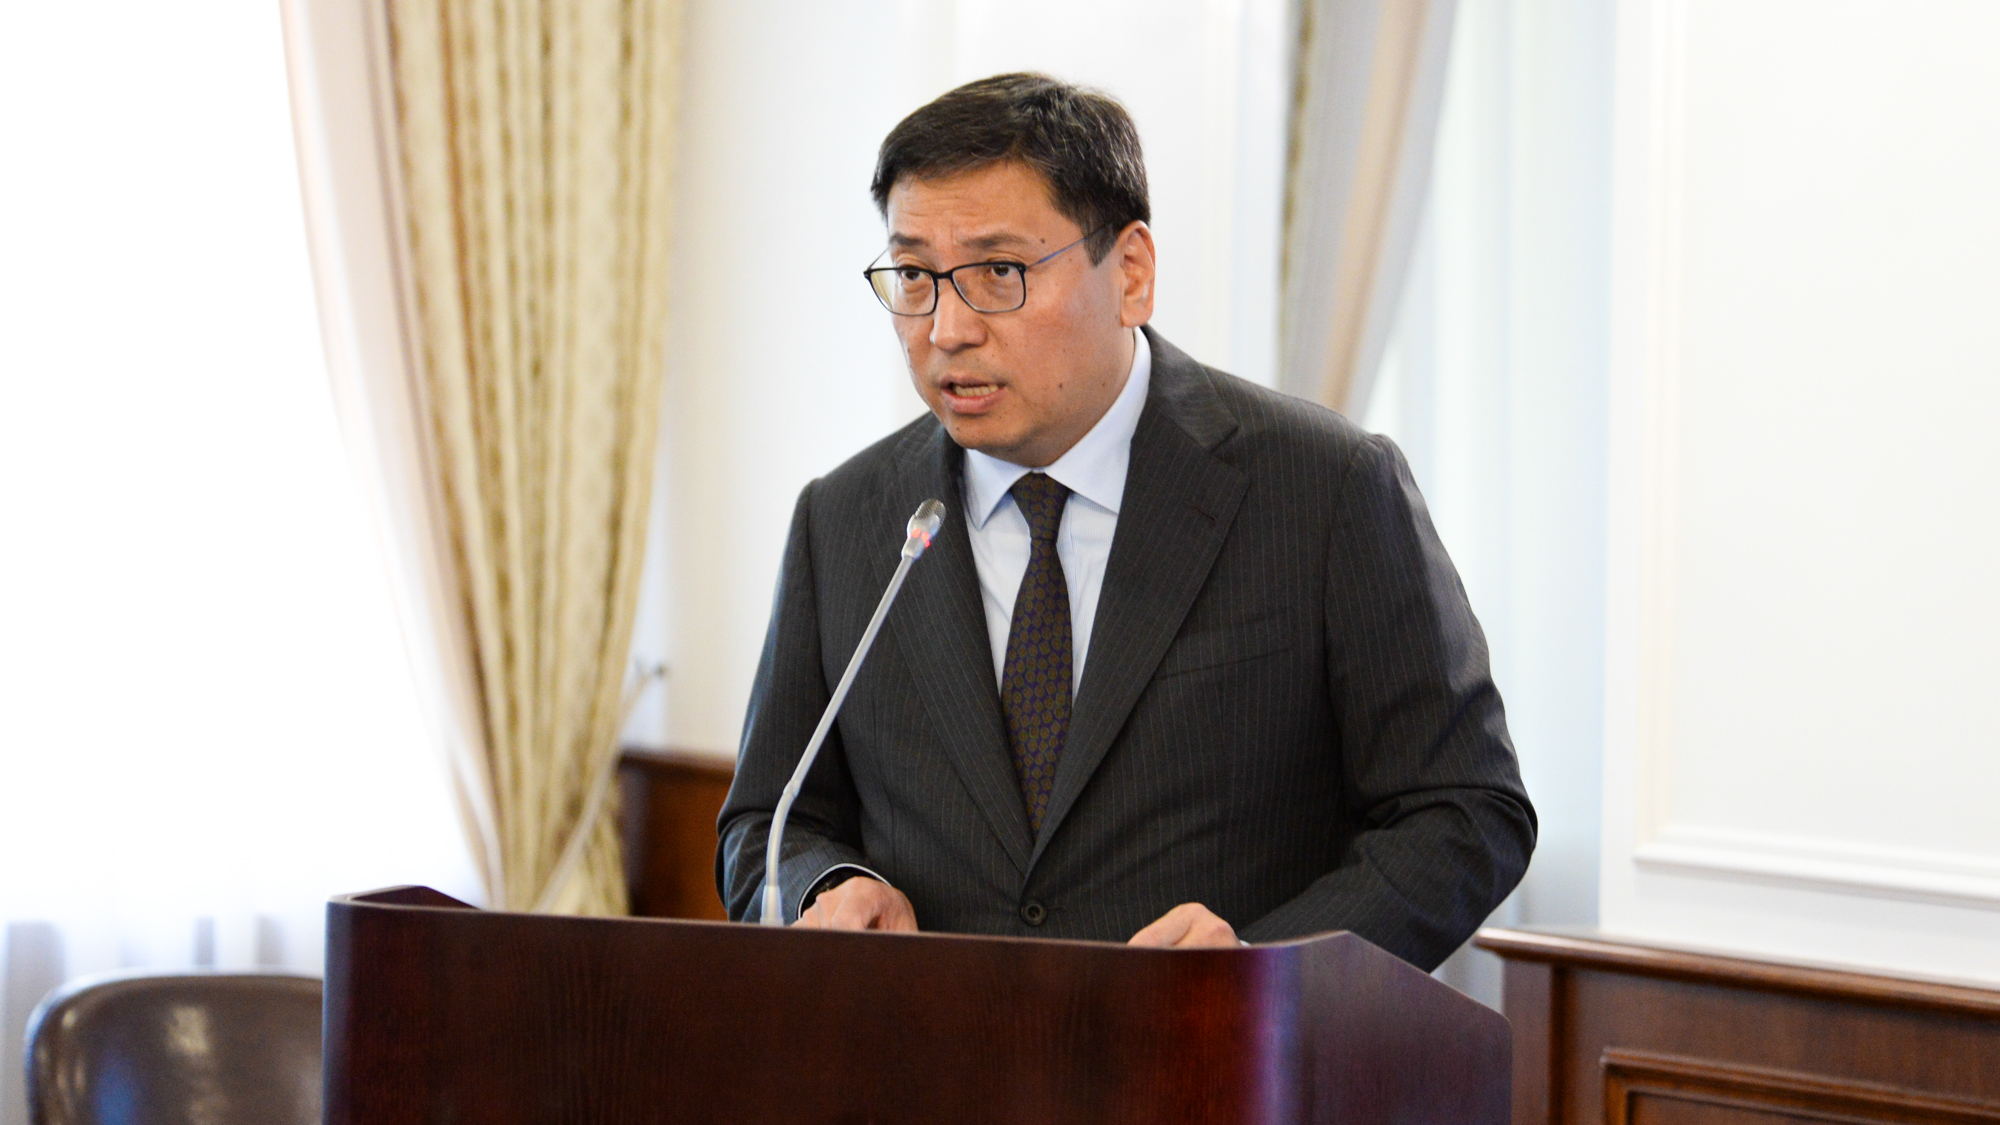 National Bank of Kazakhstan is ready to increase transparency and public trust in financial regulator’s exchange rate policy